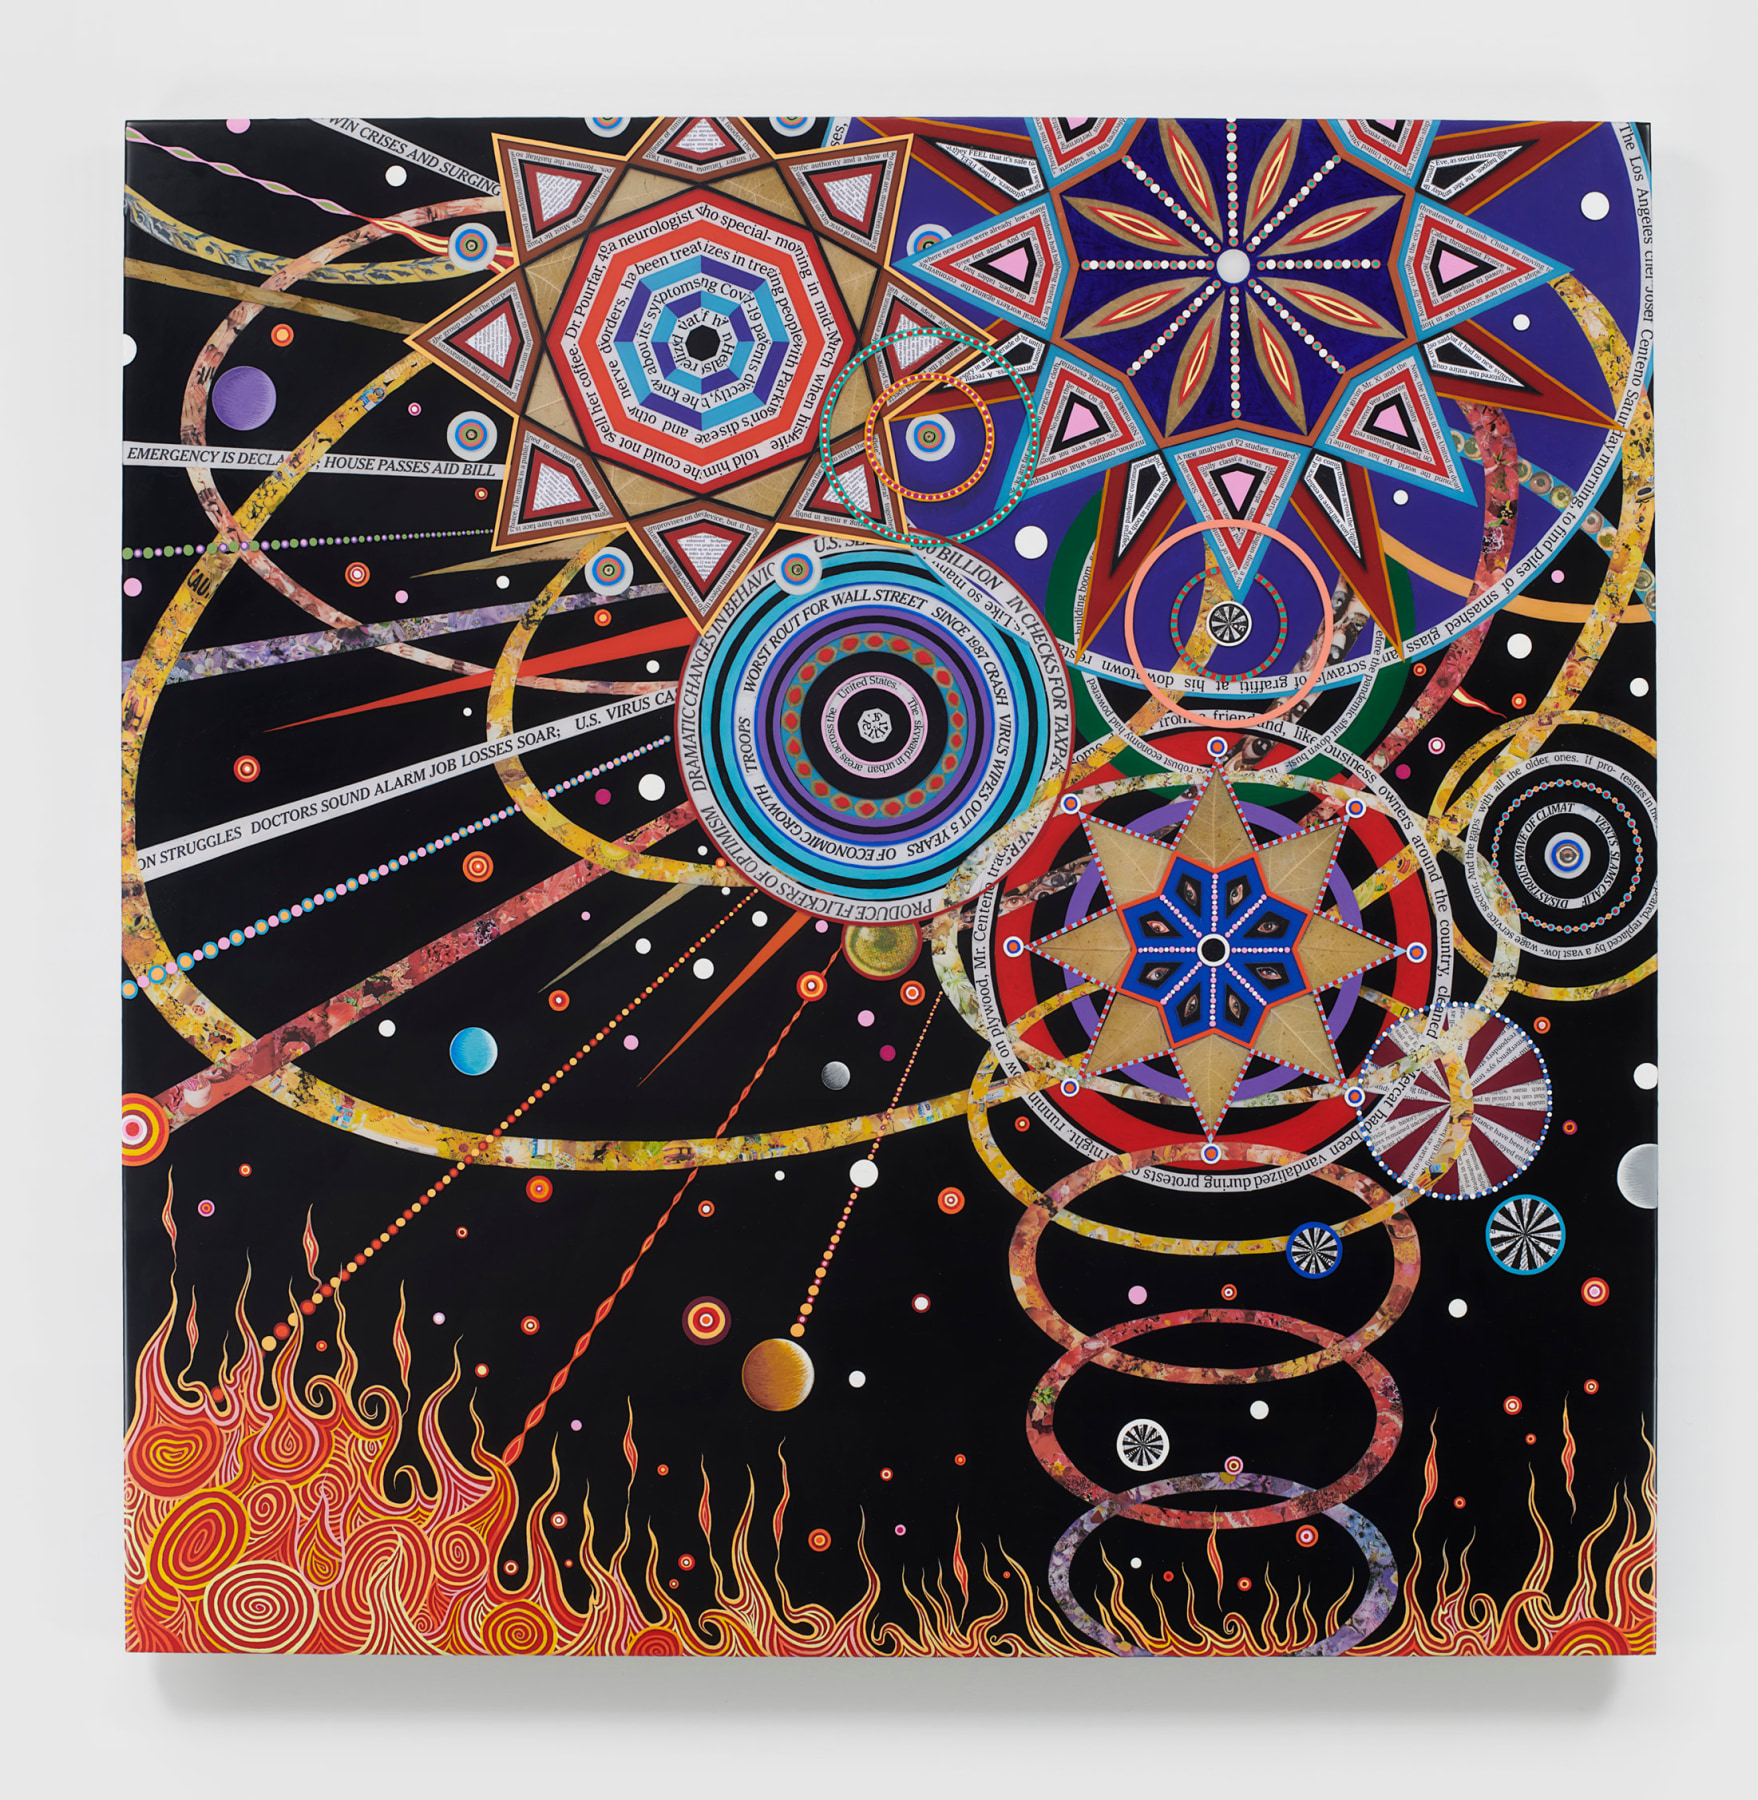 Image of FRED TOMASELLI's Untitled, 2020